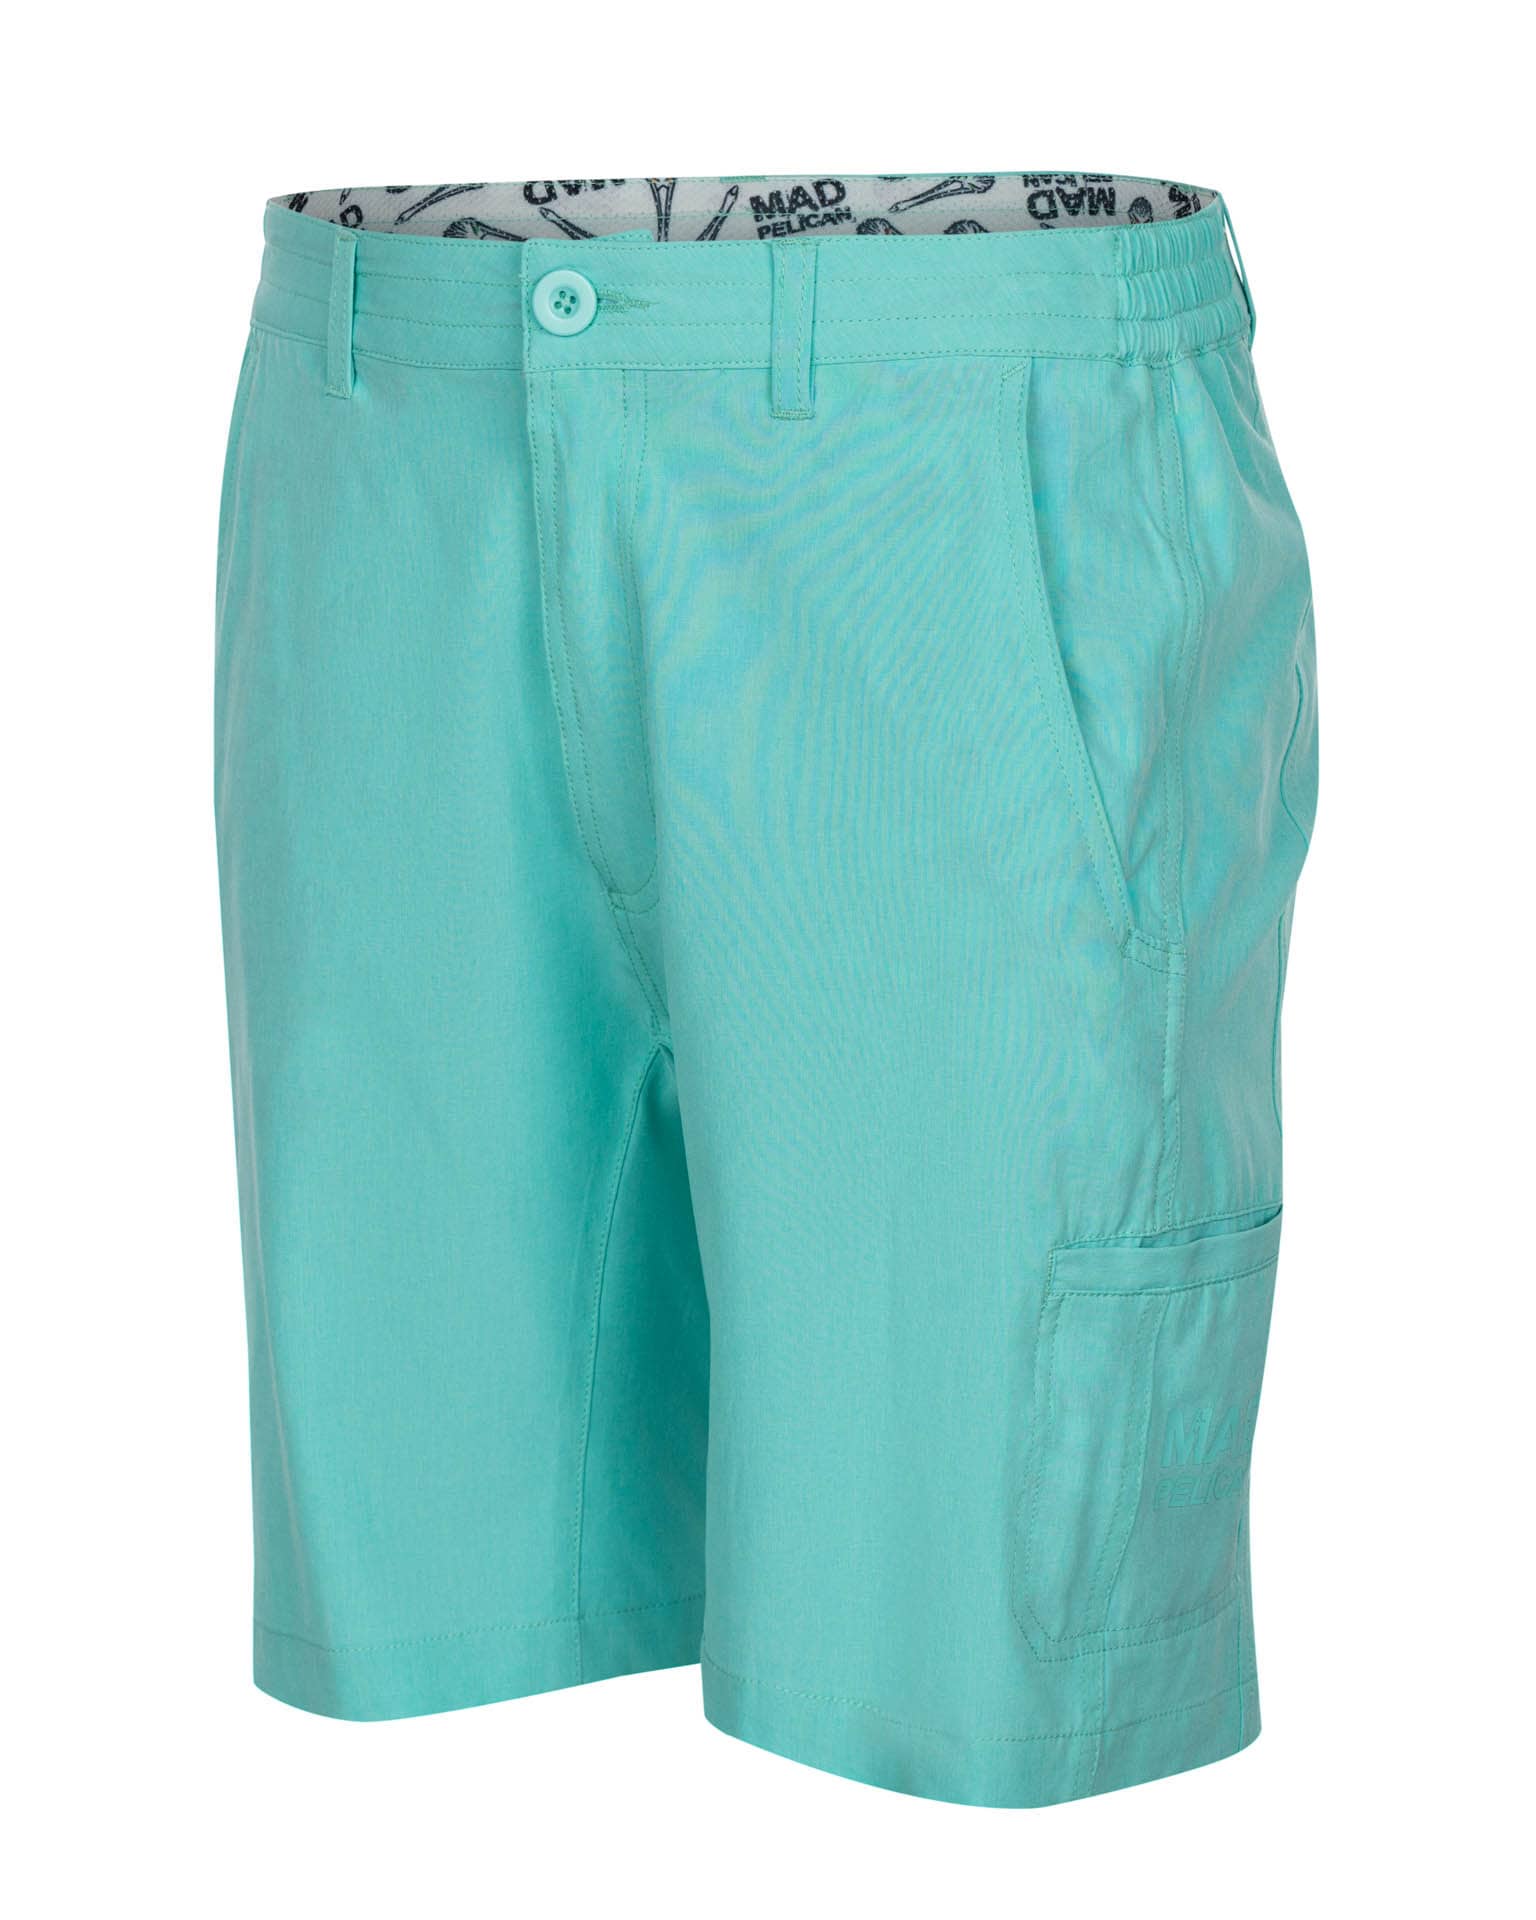 Mad Pelican Men's Blue Board Shorts (X-large) at Lowes.com